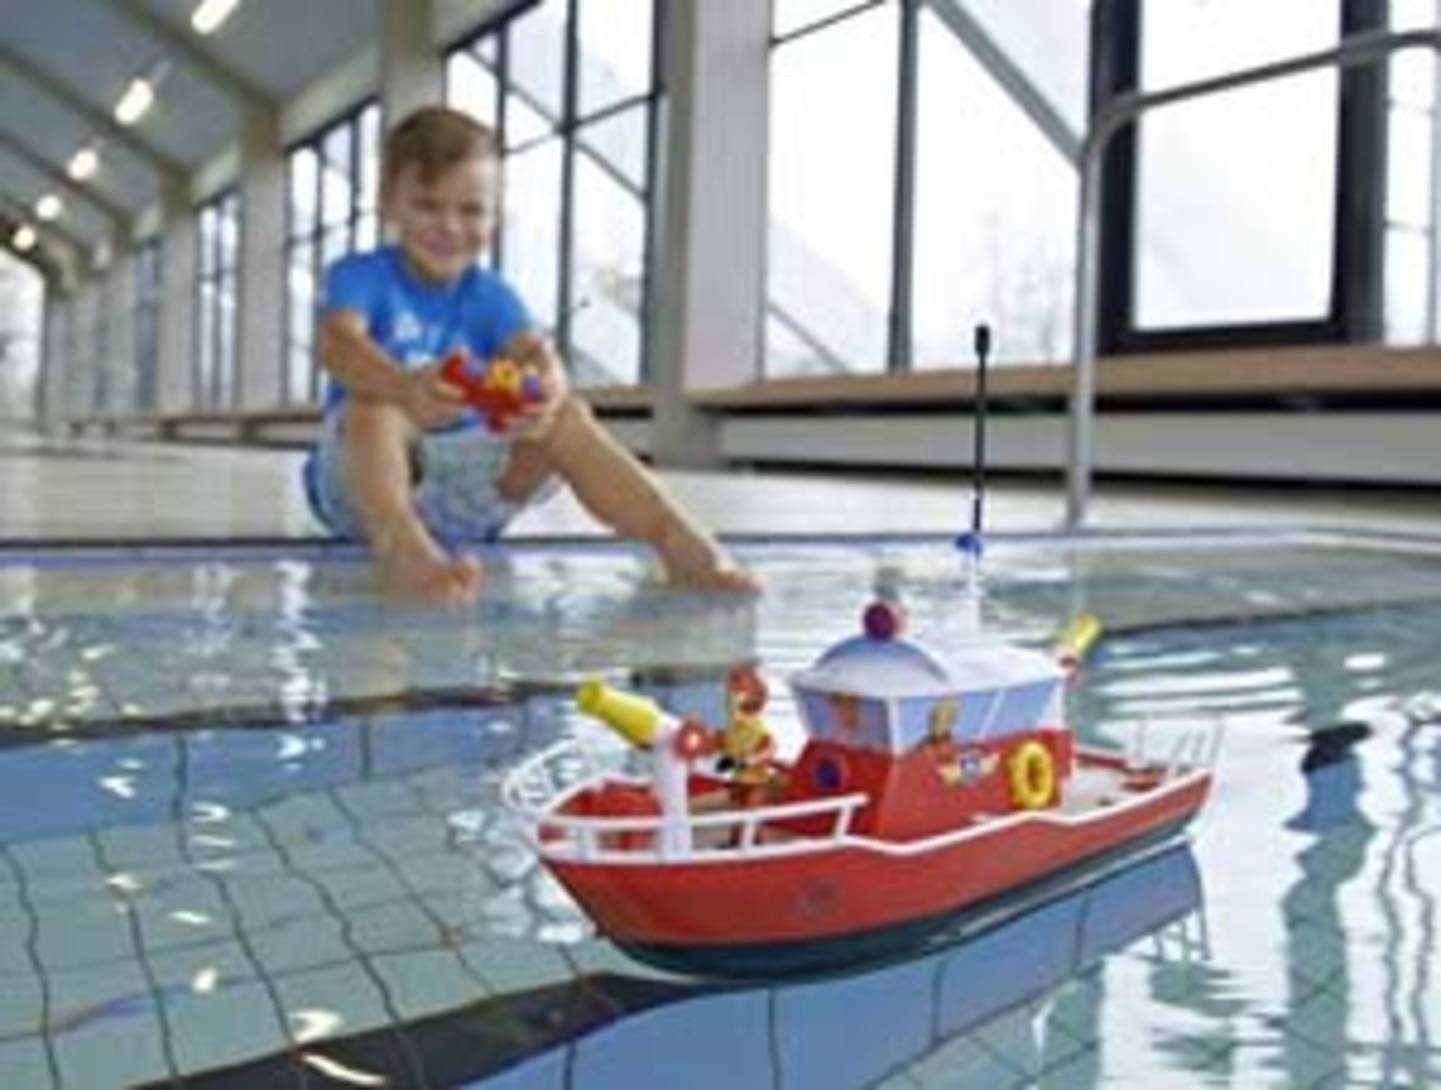 Child plays with fire-fighting boat